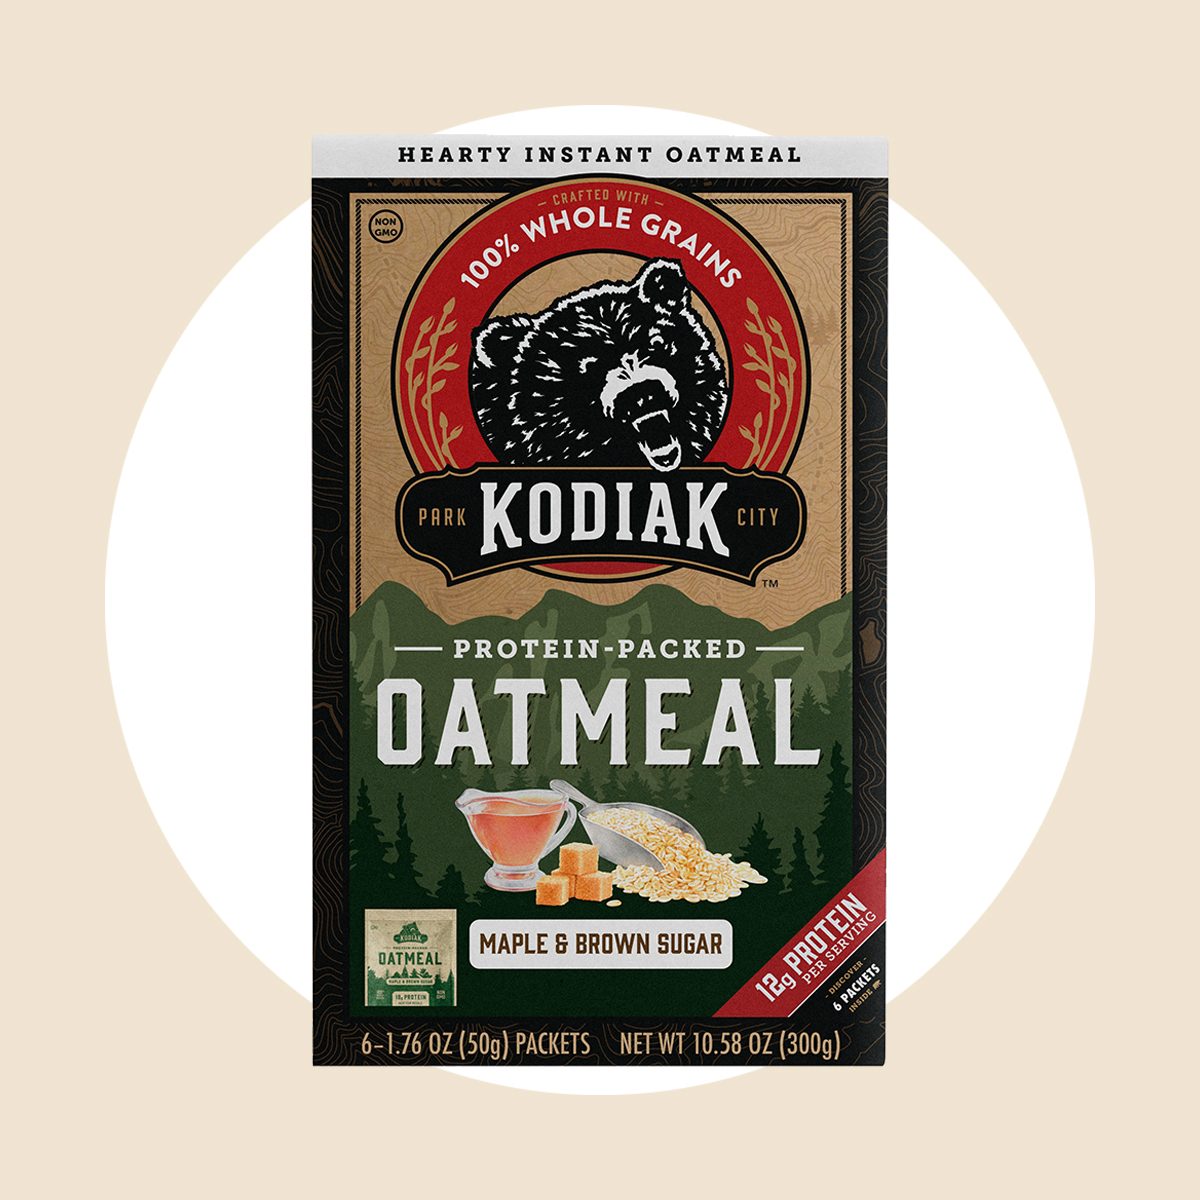 The Best Instant Oatmeal According to a Blind Taste Test